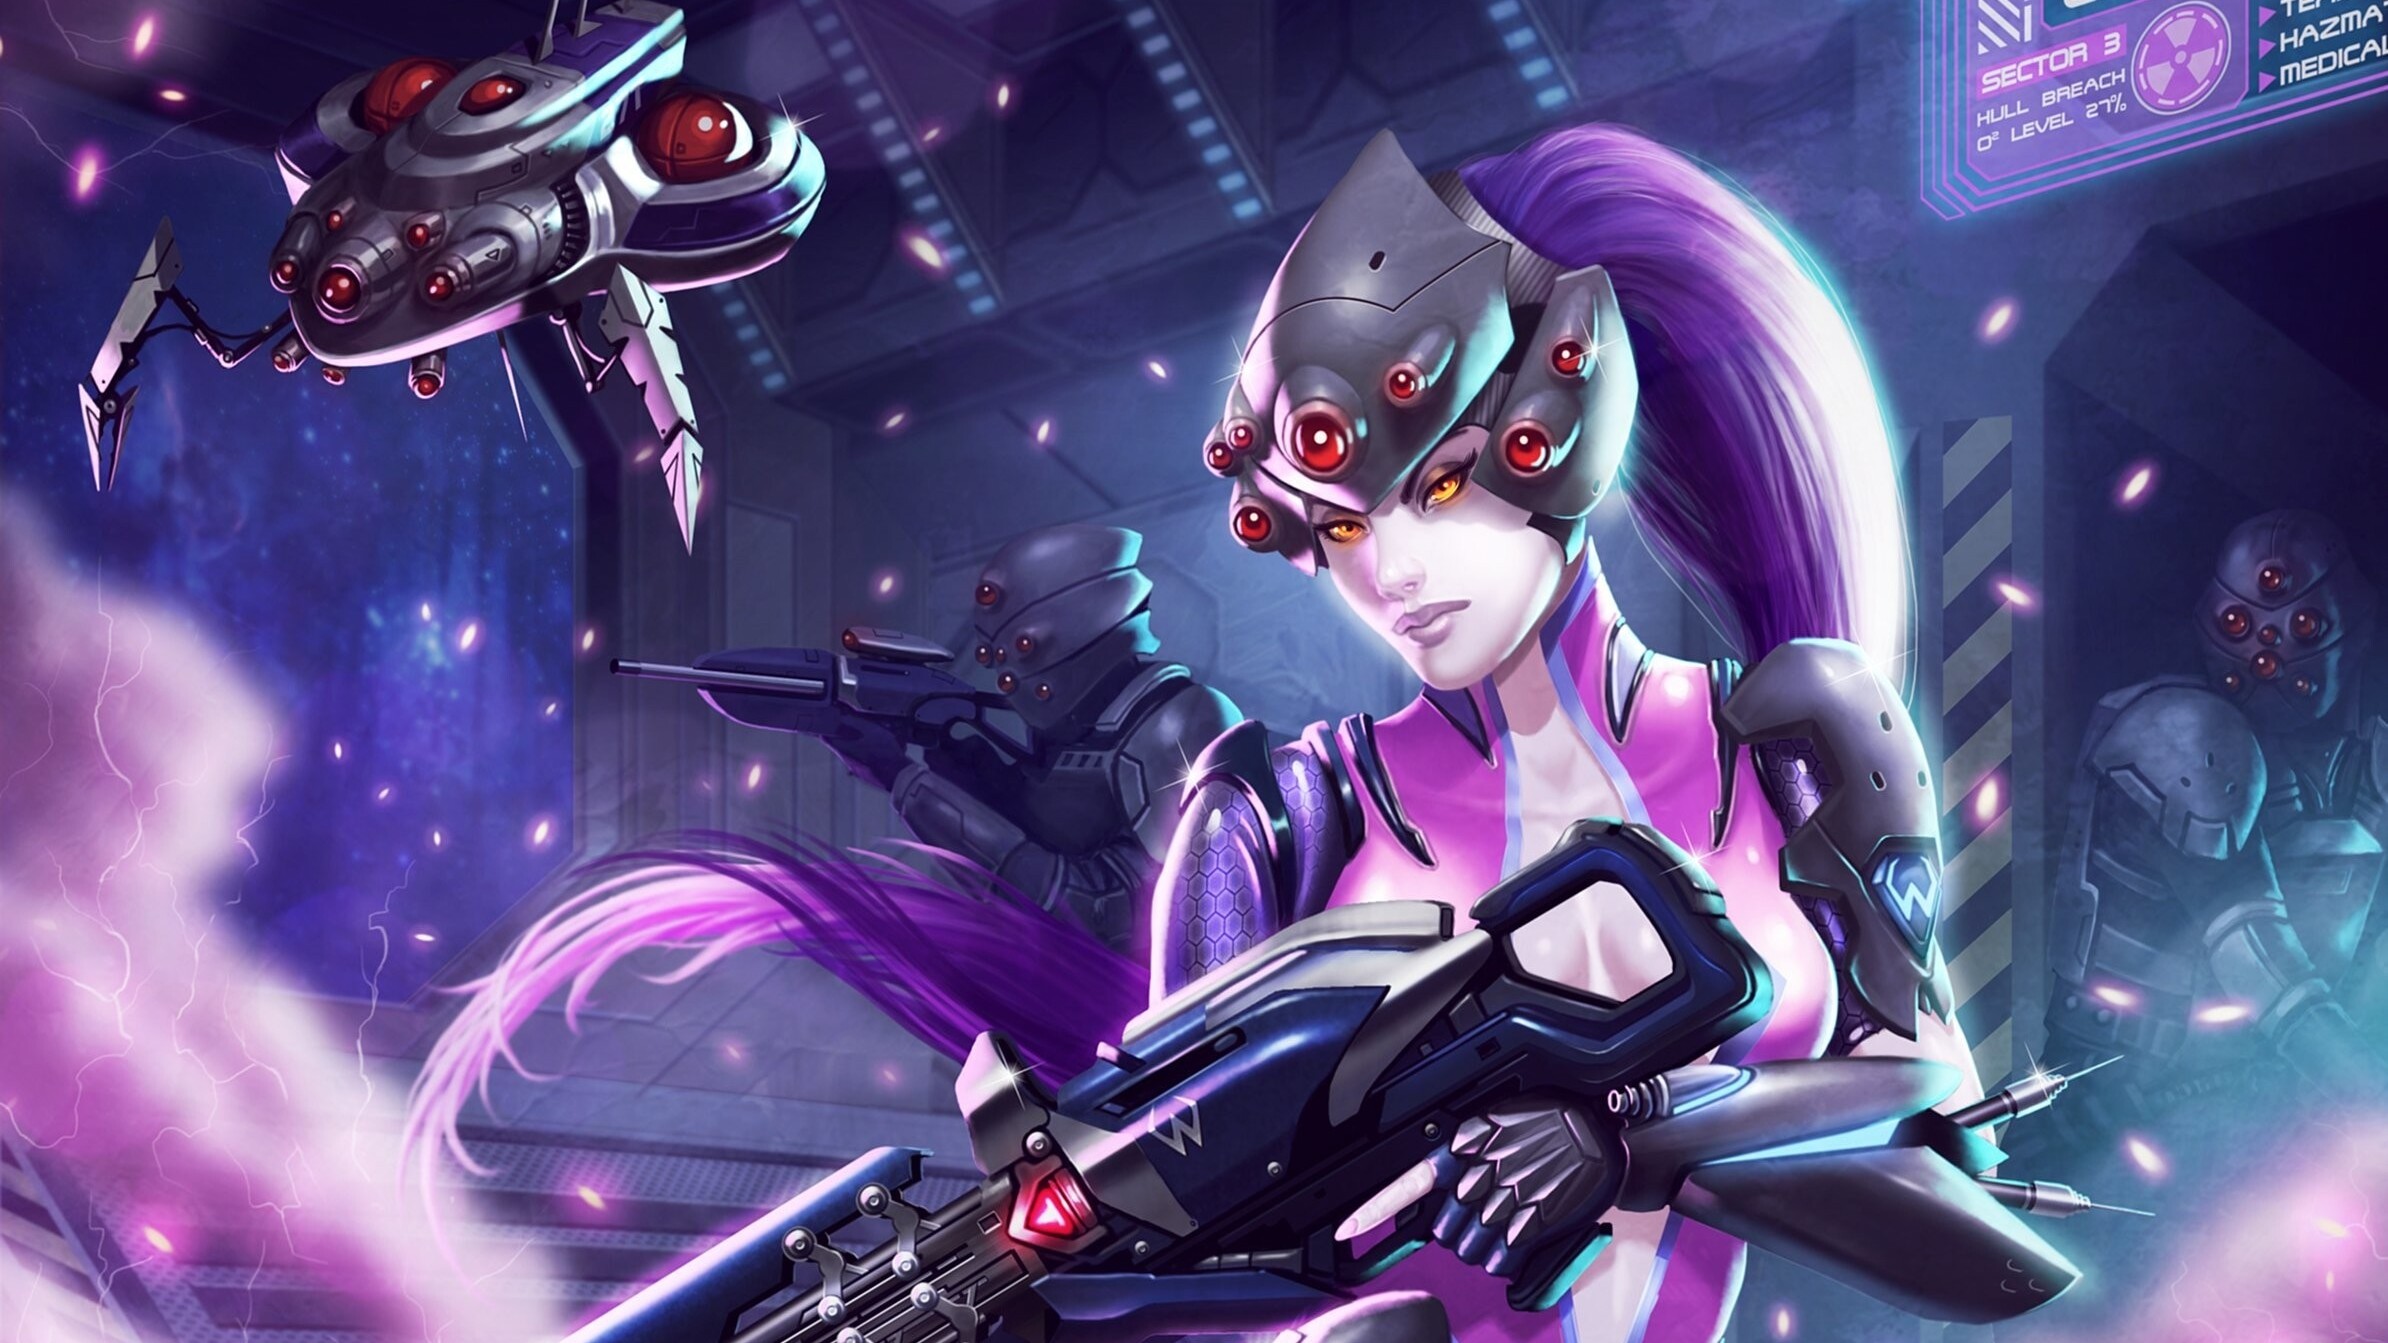 Overwatch: Widowmaker, Blizzard, A French sniper and assassin. 2390x1350 HD Background.